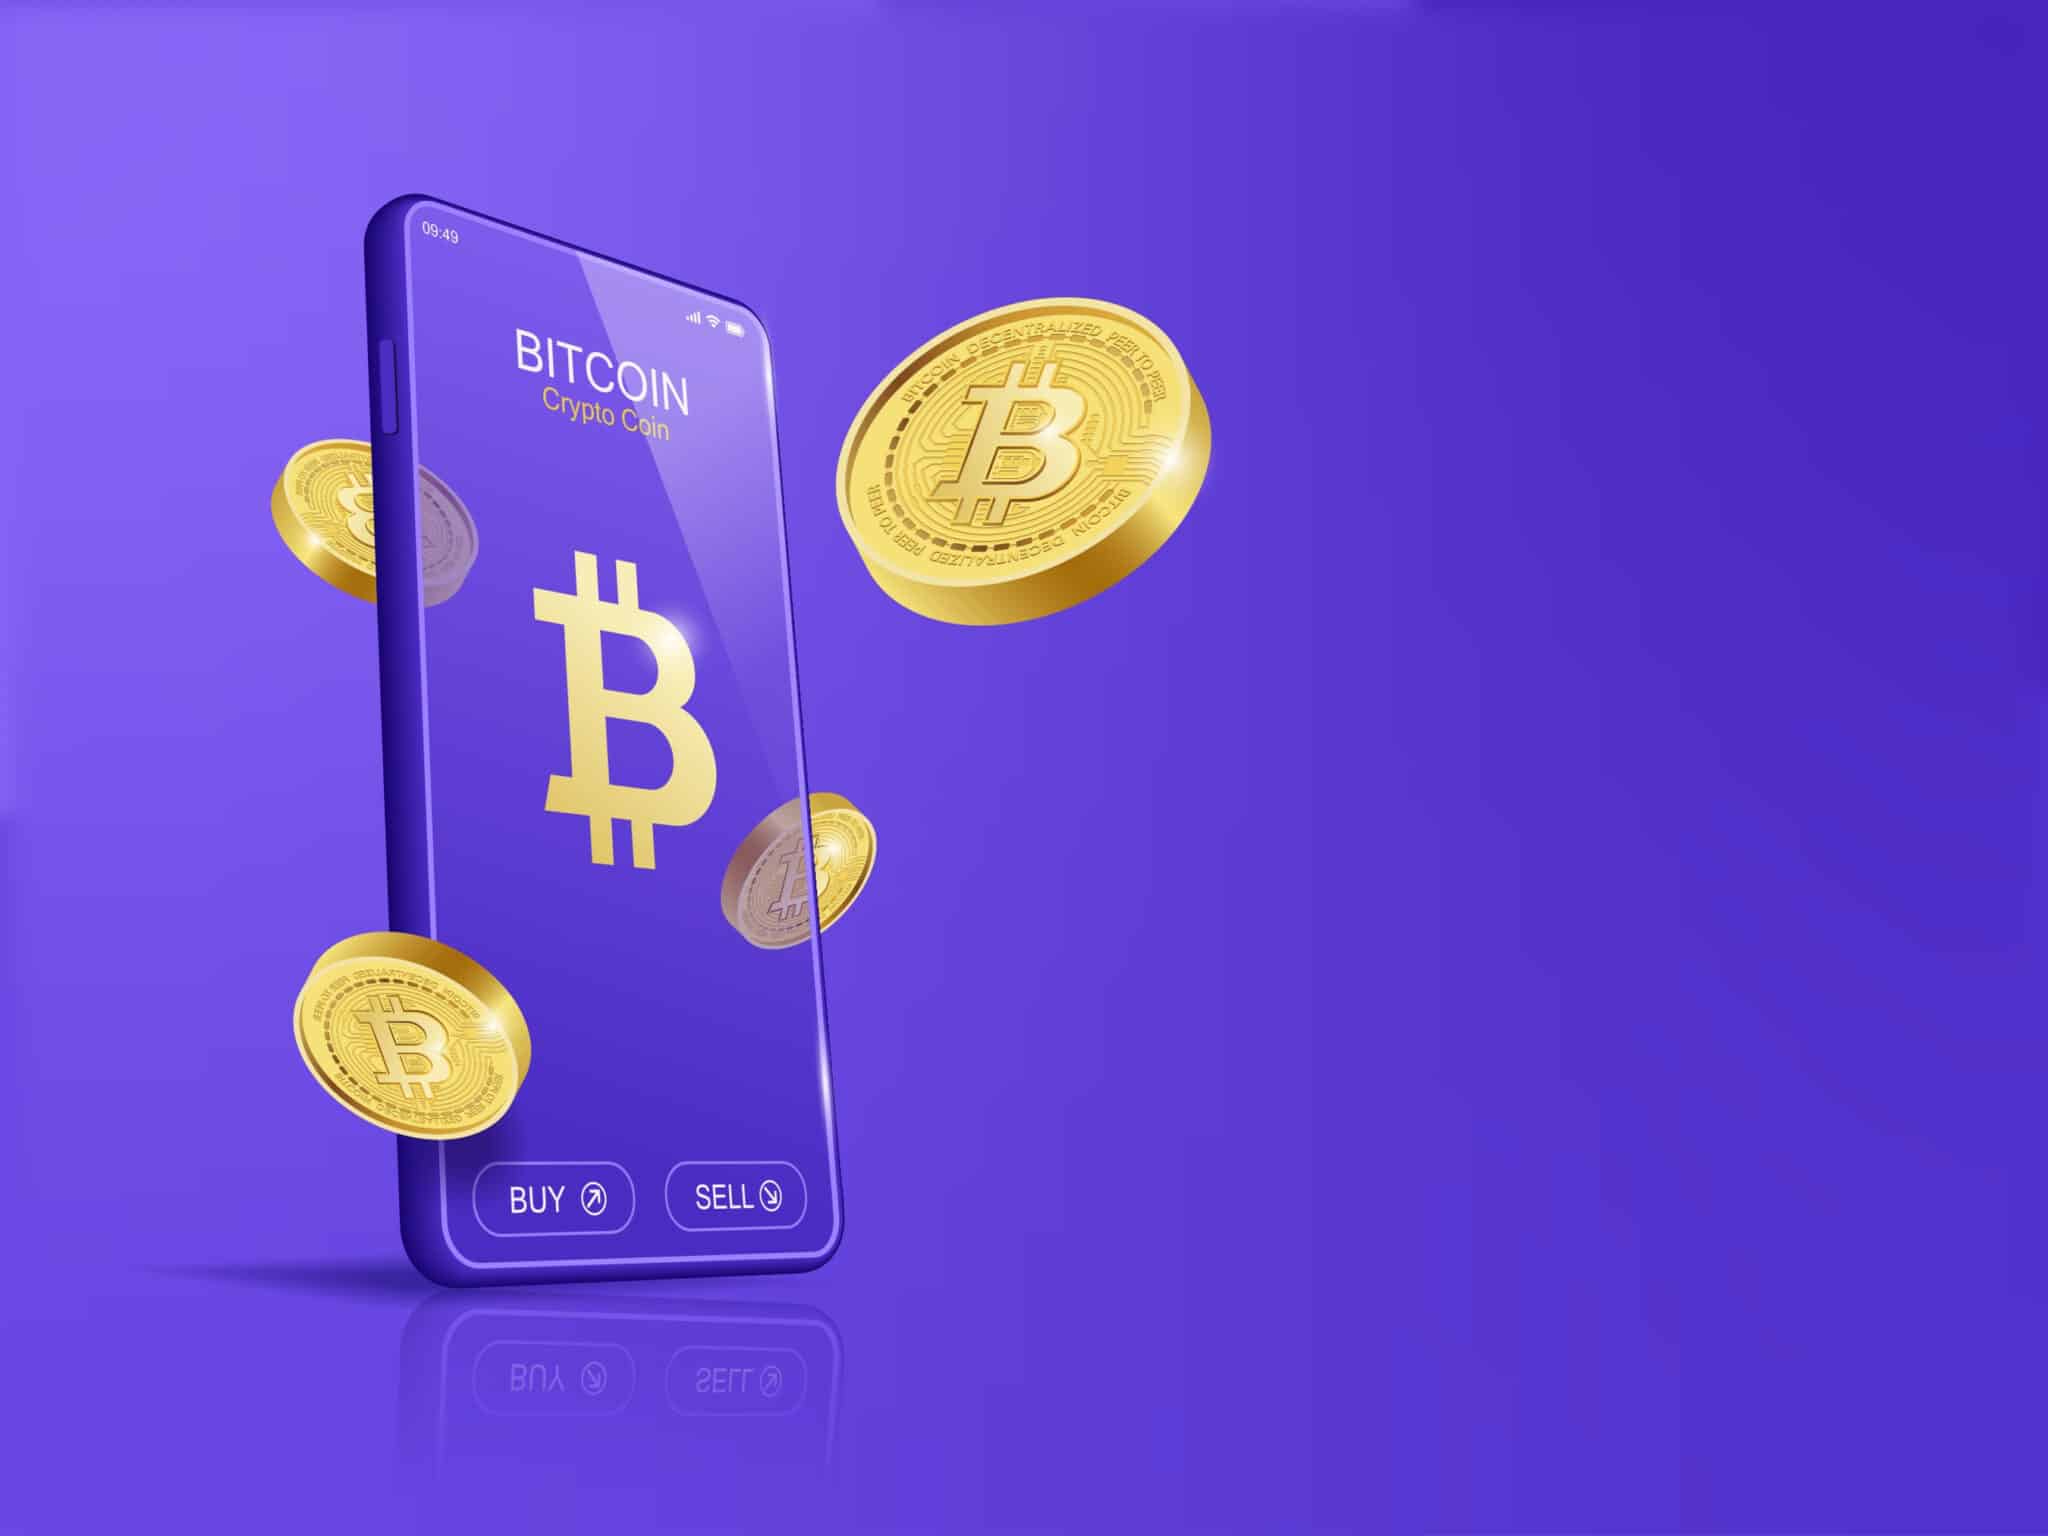 Illustration of a smartphone with the Bitcoin logo on the screen.